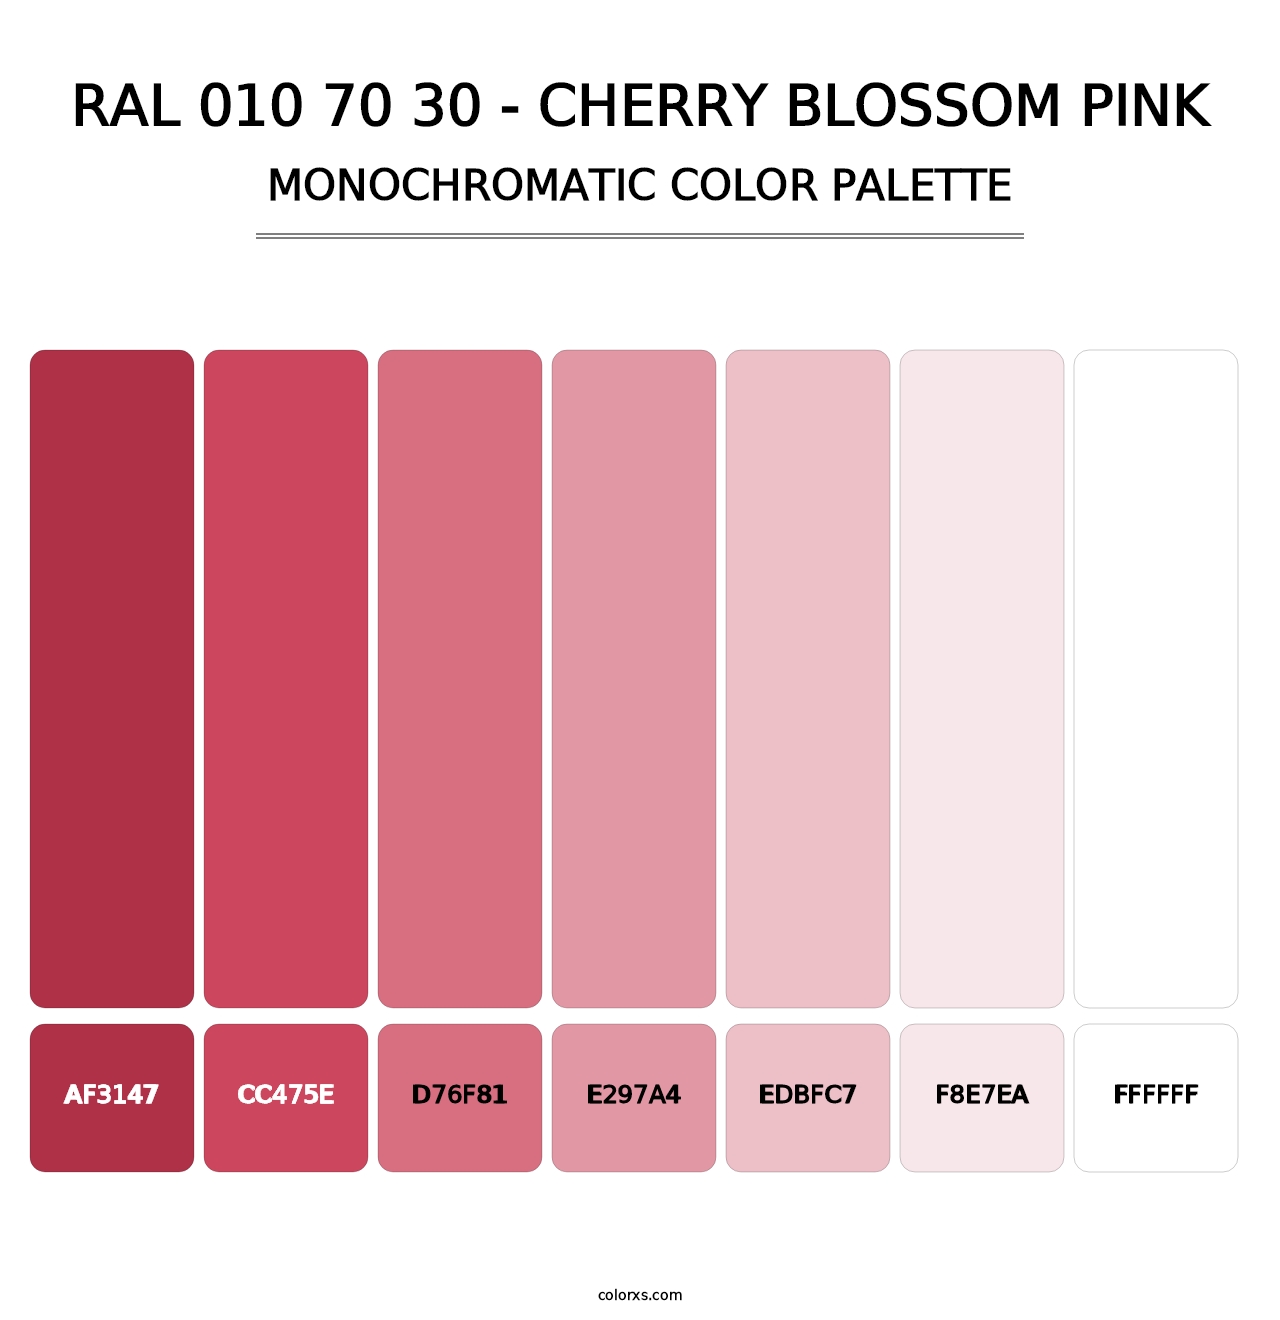 RAL 010 70 30 - Cherry Blossom Pink - Monochromatic Color Palette